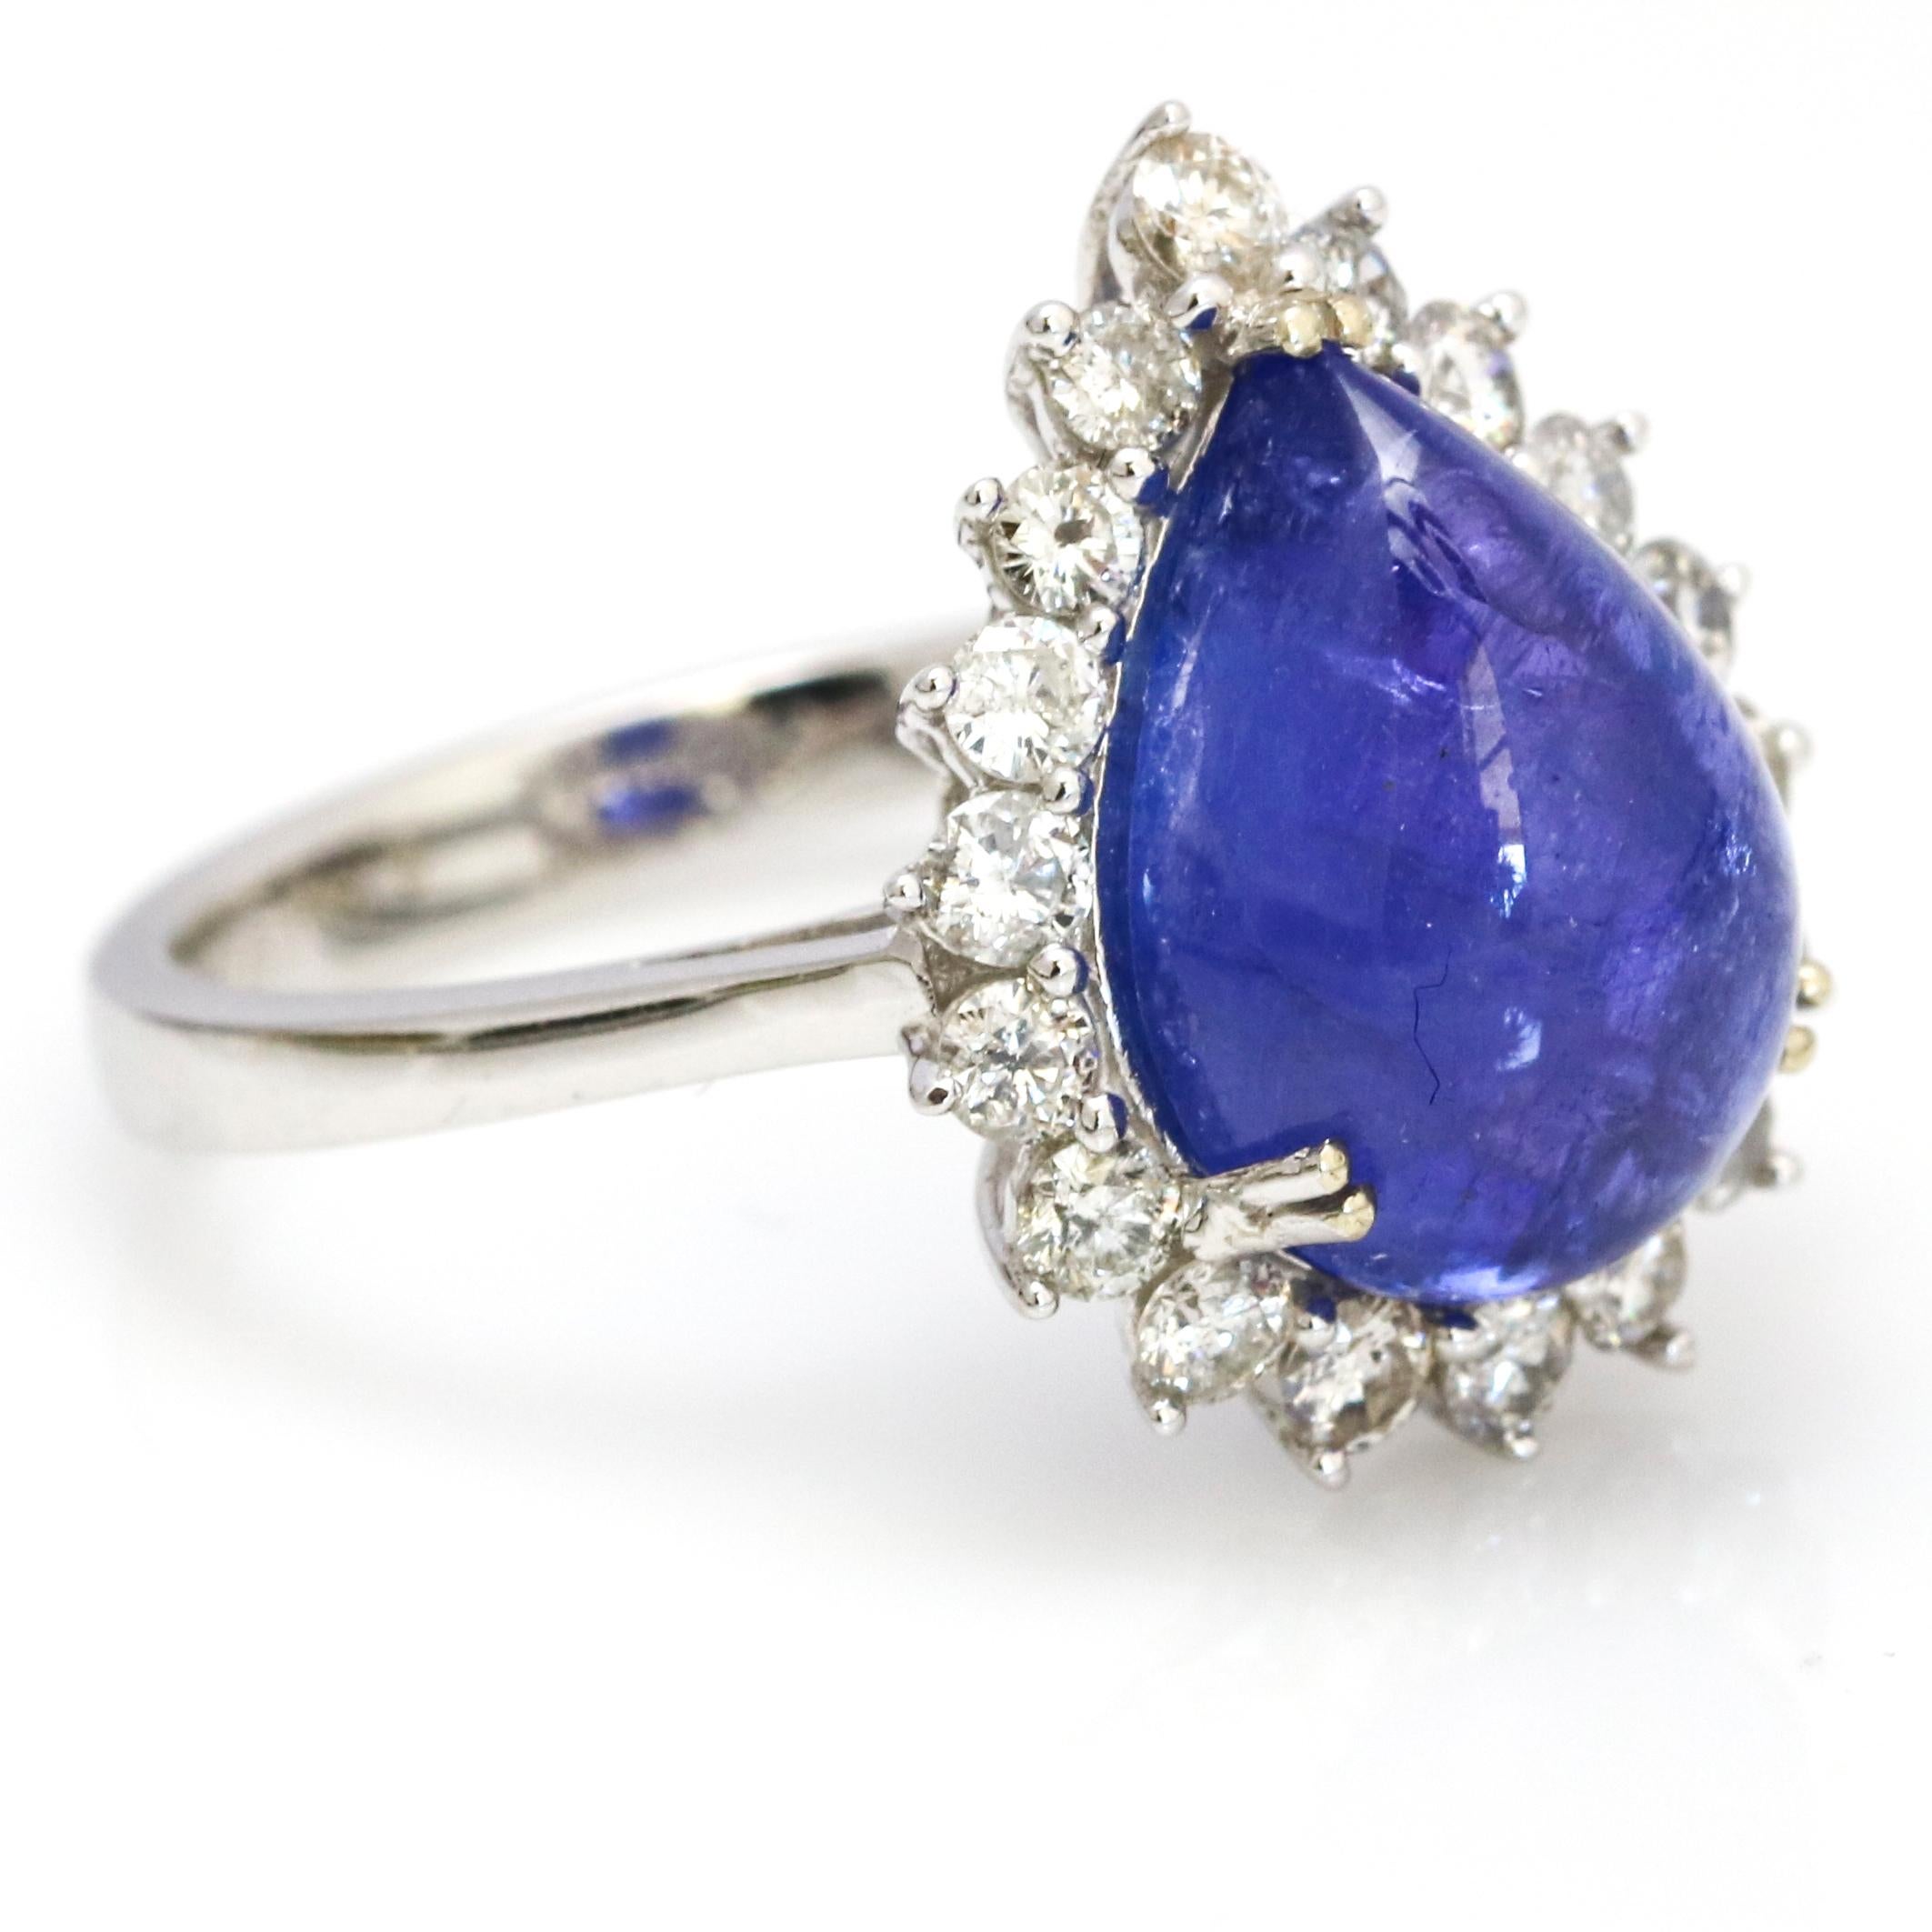 Tanzanite and diamond ring in 14-karat white gold. The ring has a pear cabochon cut natural  Tanzanite center surrounded by diamonds. 

Size, 7 (can be resized)
Gemstone (Tanzanite) total carat weight, 6.00 carats
Diamond total carat weight, .30